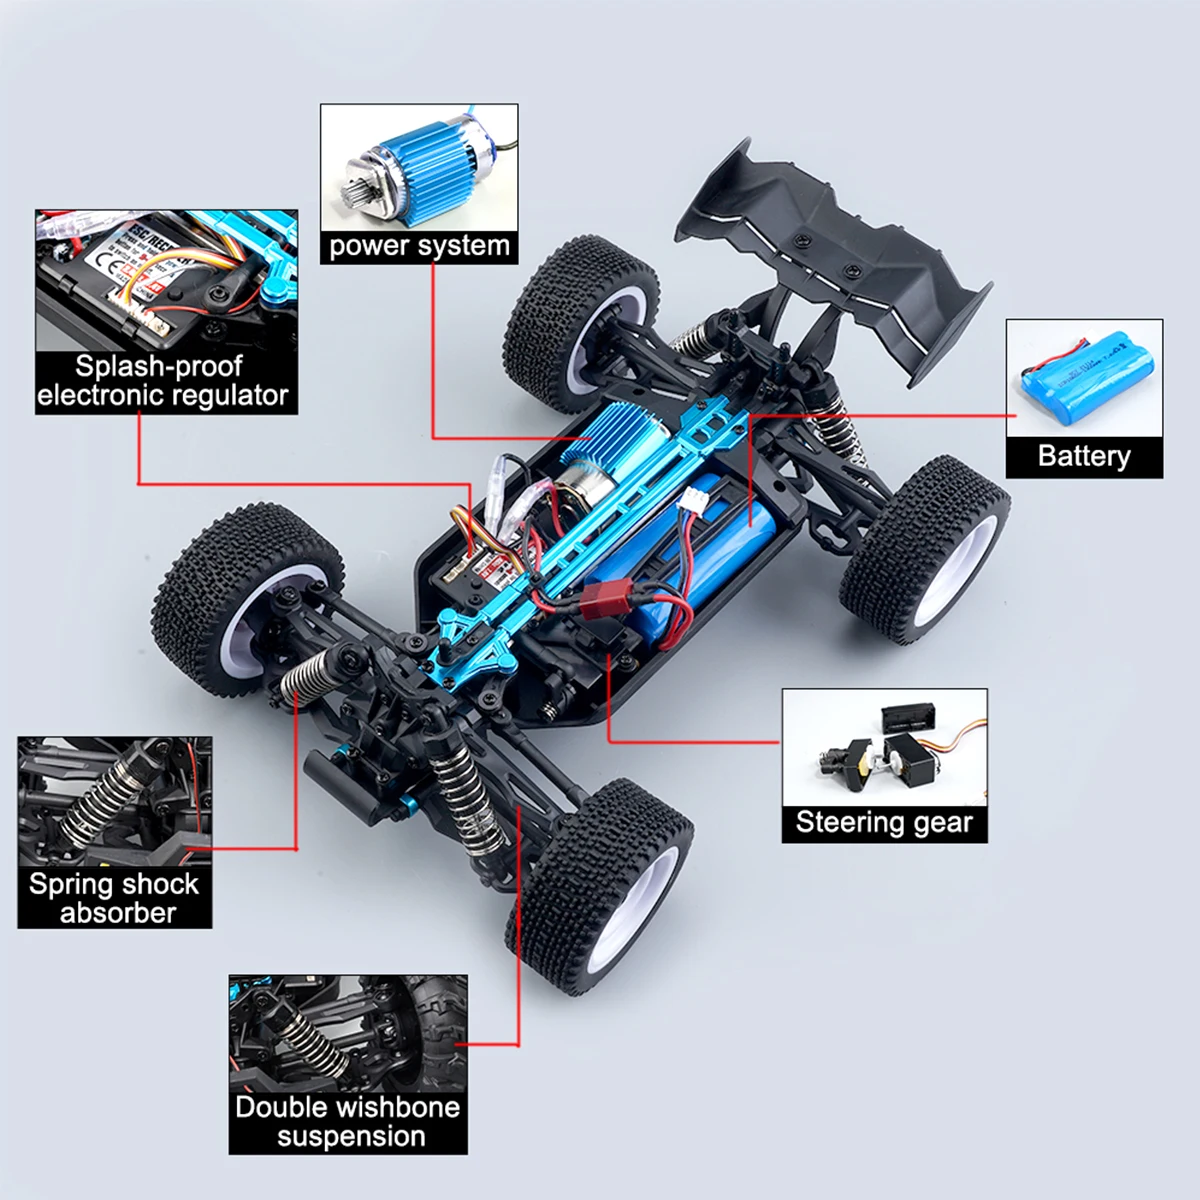 2.4G RC Car 1:16 Remote Control Drift Racing Car 4WD 35km/h High Speed Off Road Vehicles Electronic Race Toy Gift for Kids Adult enlarge